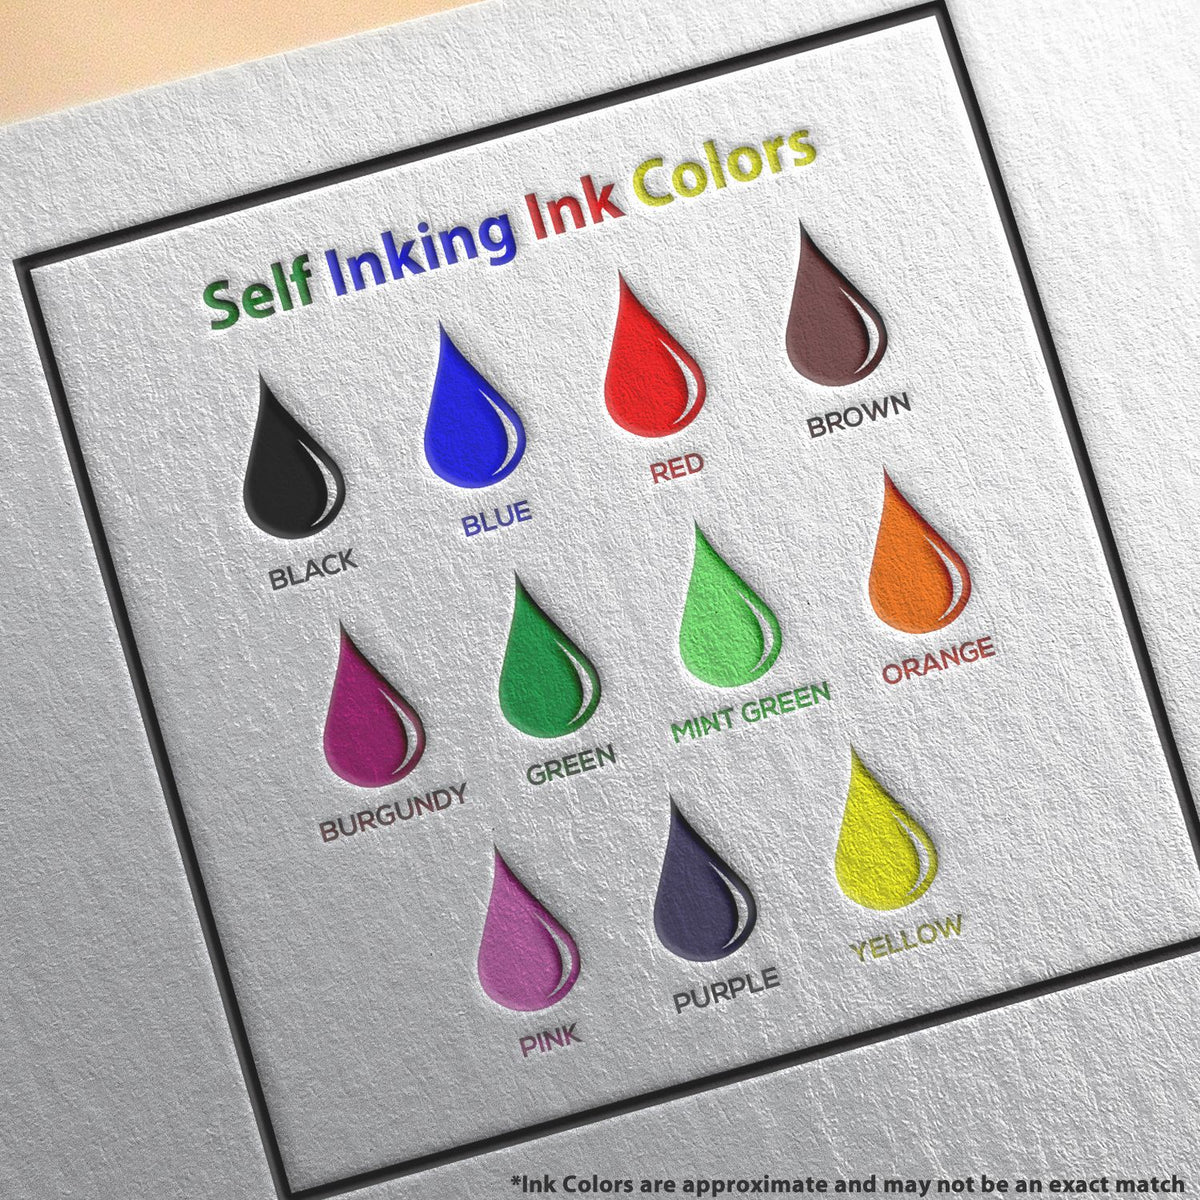 A picture showing the different ink colors or hues available for the Self-Inking Idaho Geologist Stamp